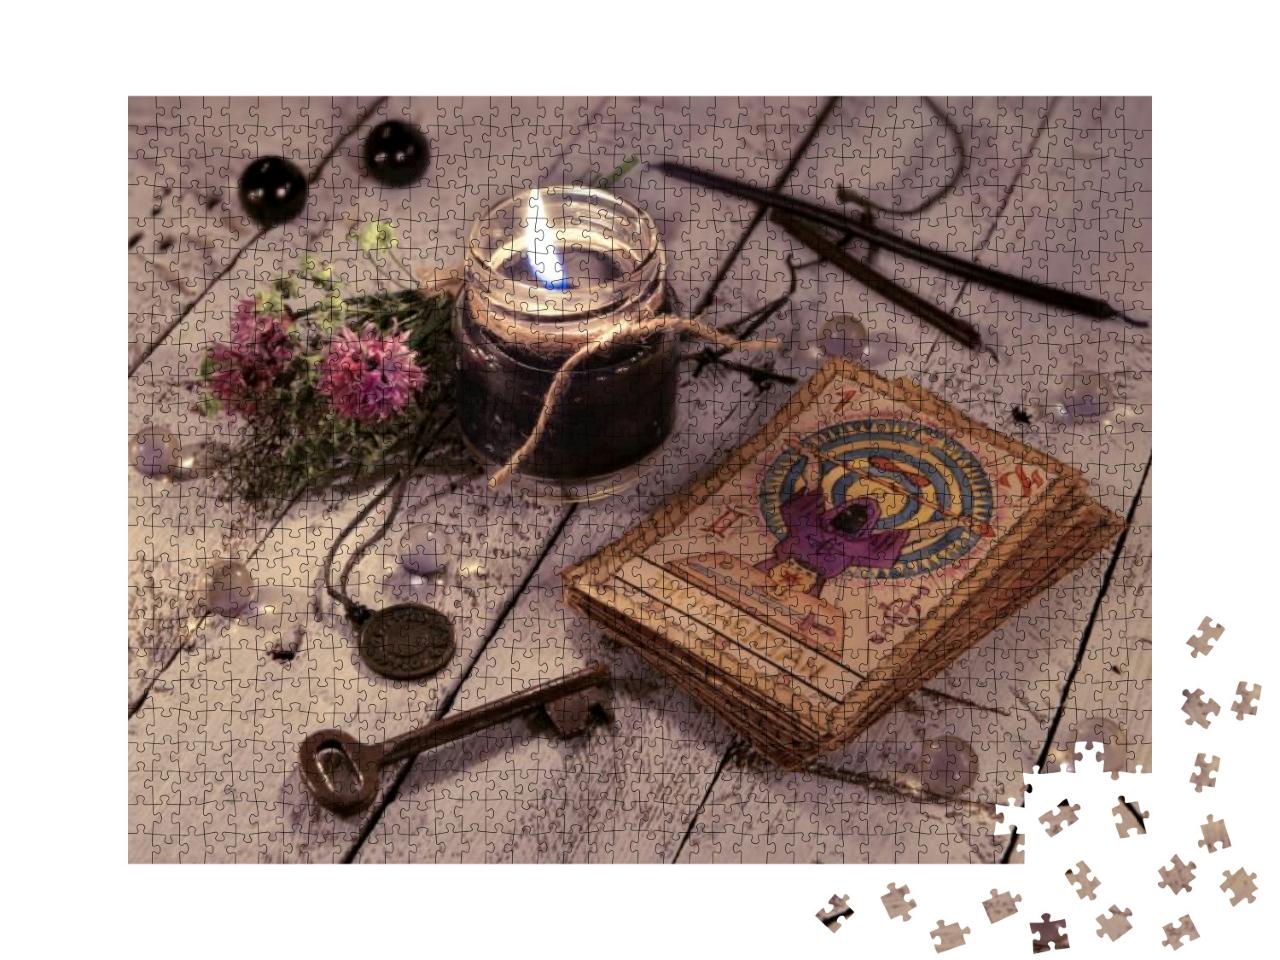 Black Candle & Old Tarot Cards on Wooden Planks... Jigsaw Puzzle with 1000 pieces